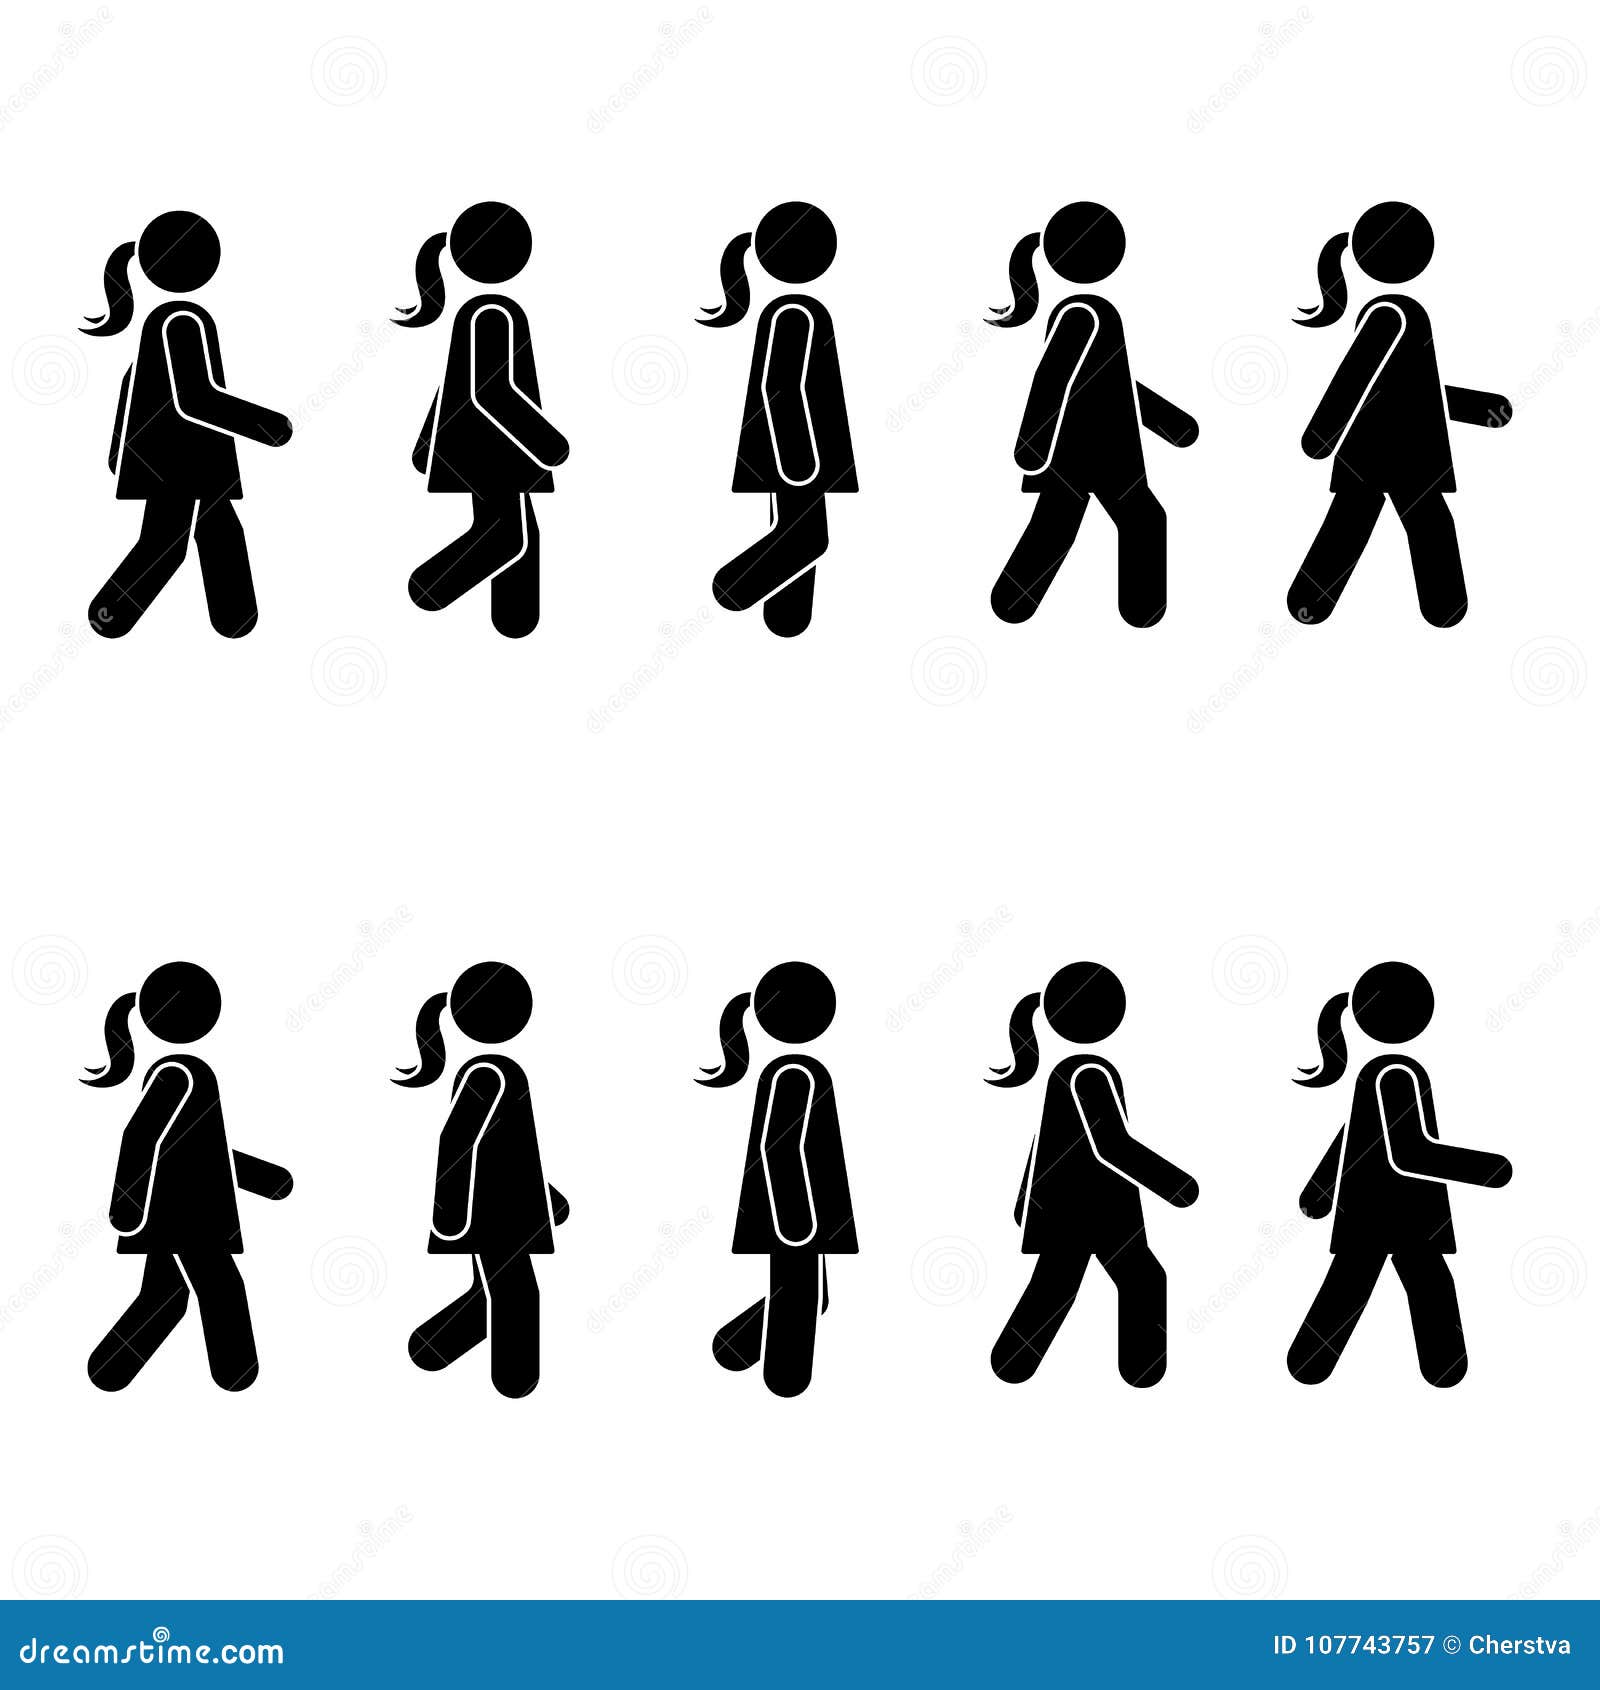 woman people various walking position. posture stick figure.  standing person icon  sign pictogram on white.